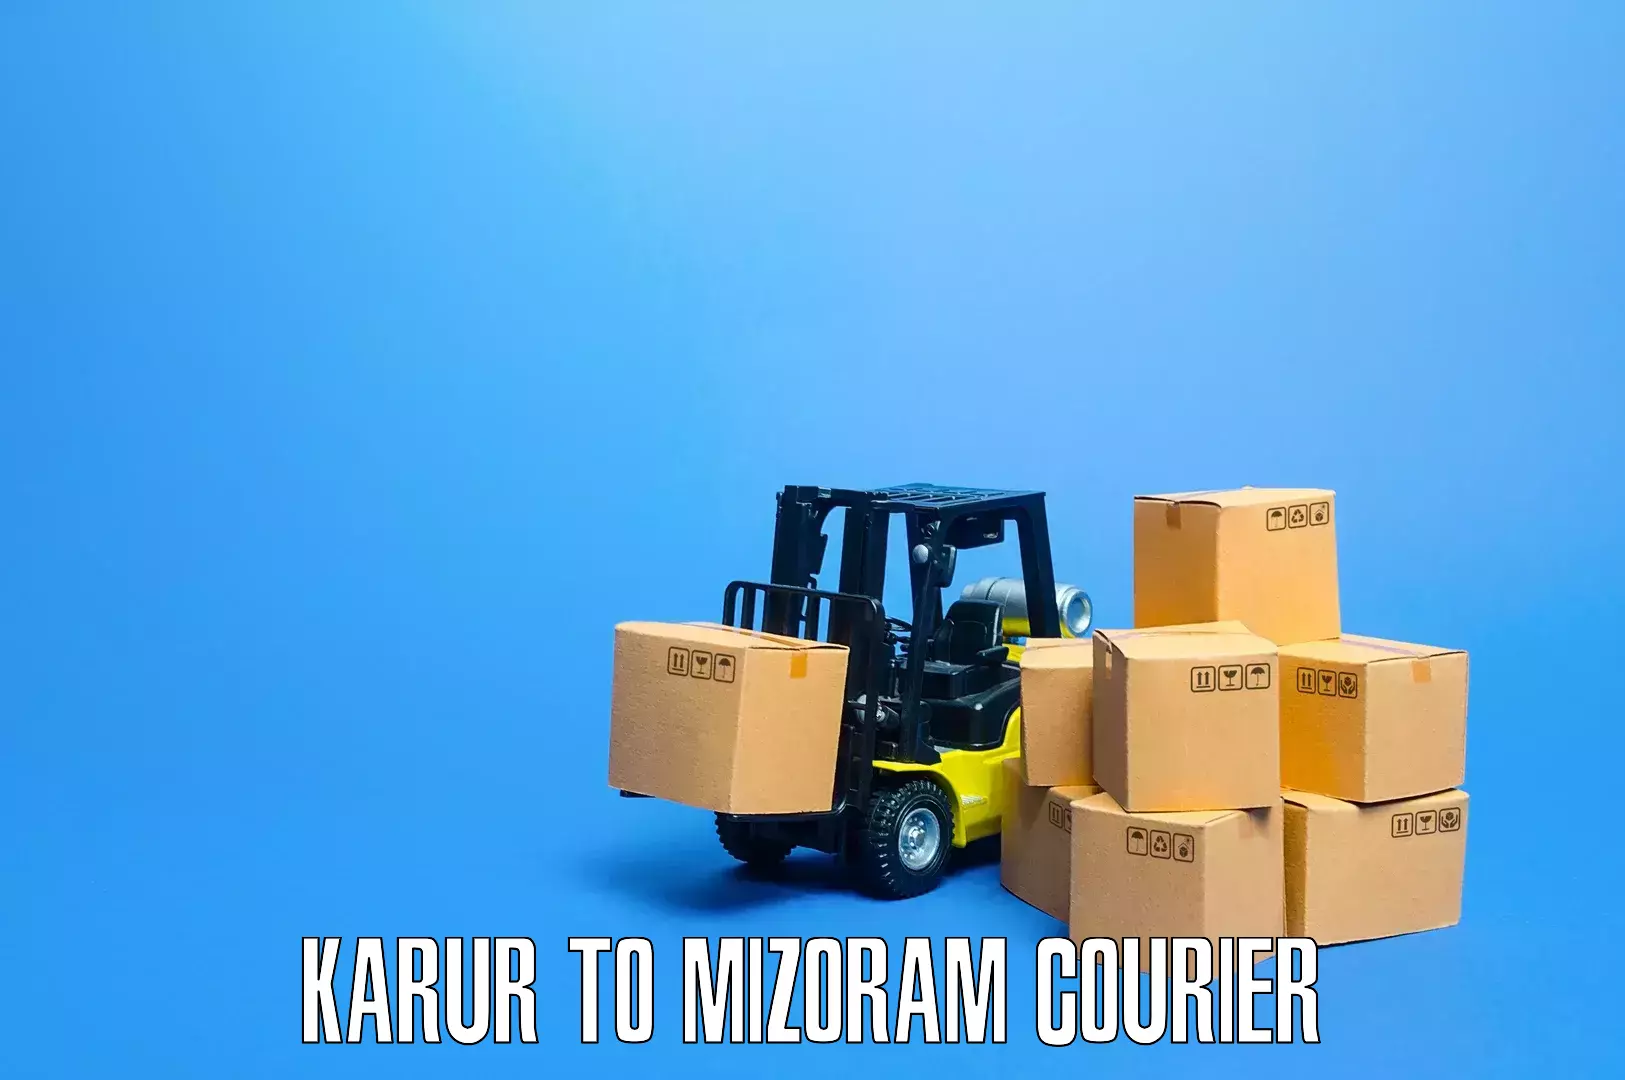 Full-service movers Karur to Thenzawl